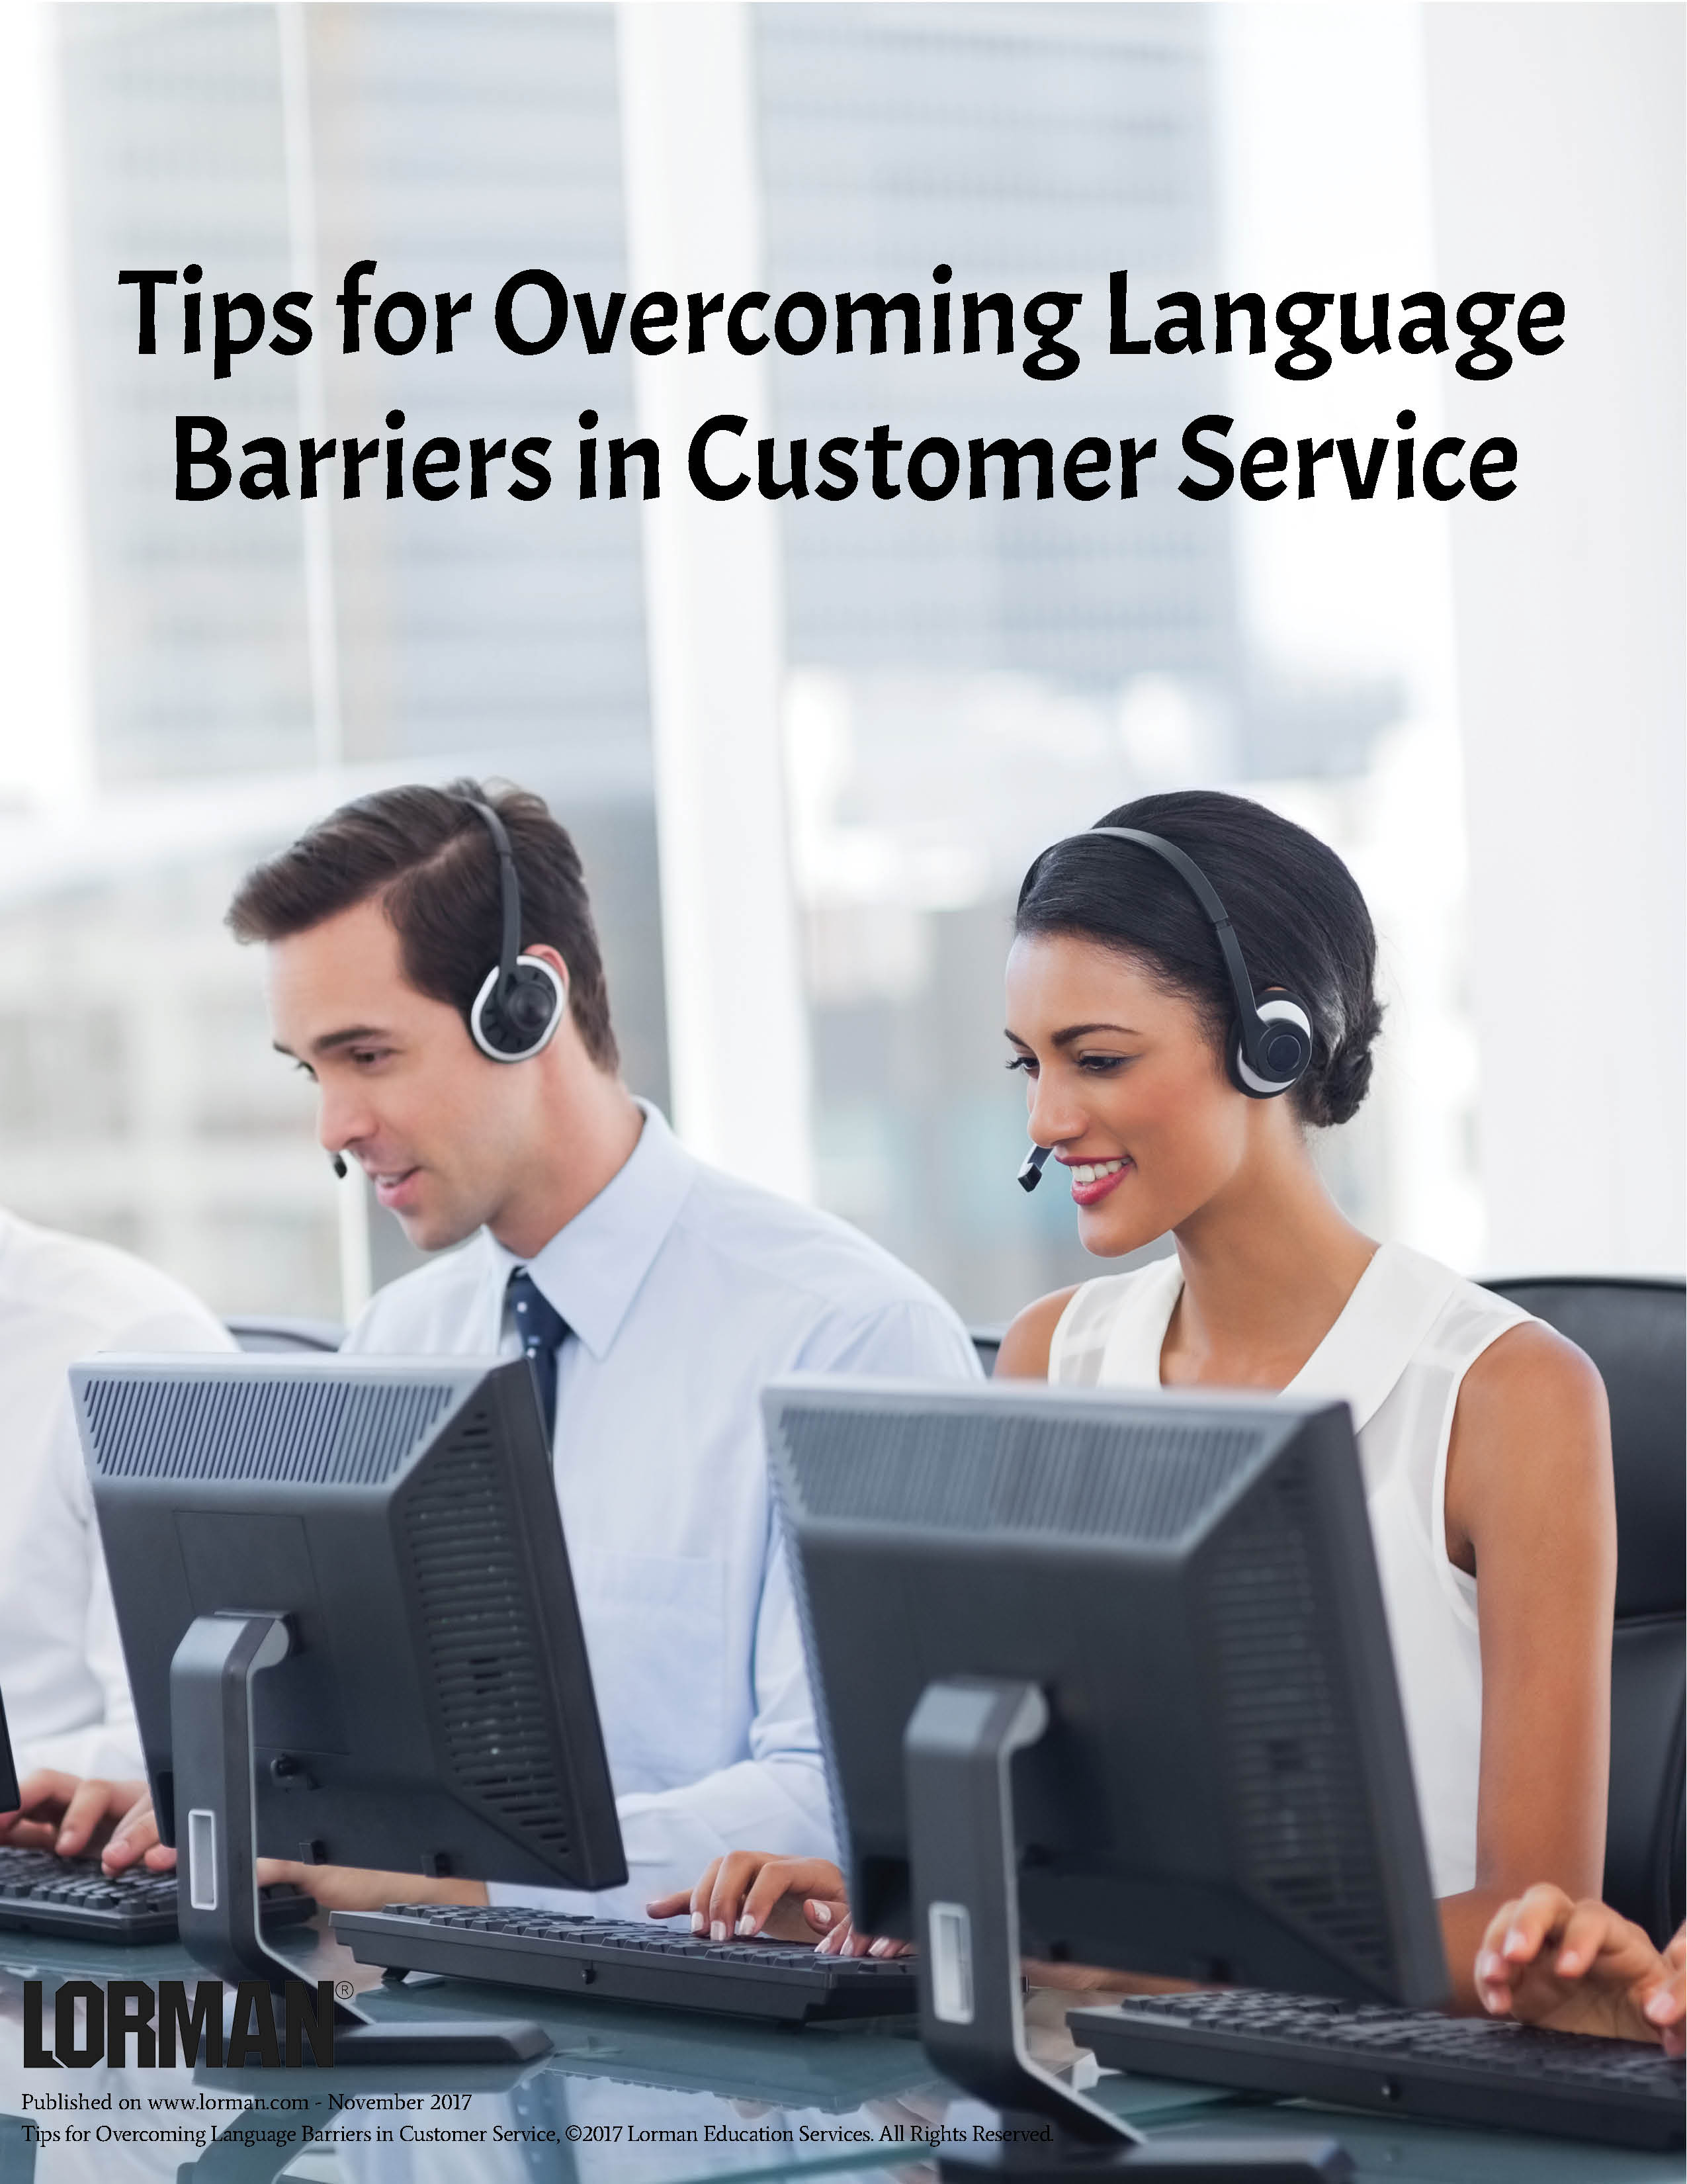 Tips for Overcoming Language Barriers in Customer Service